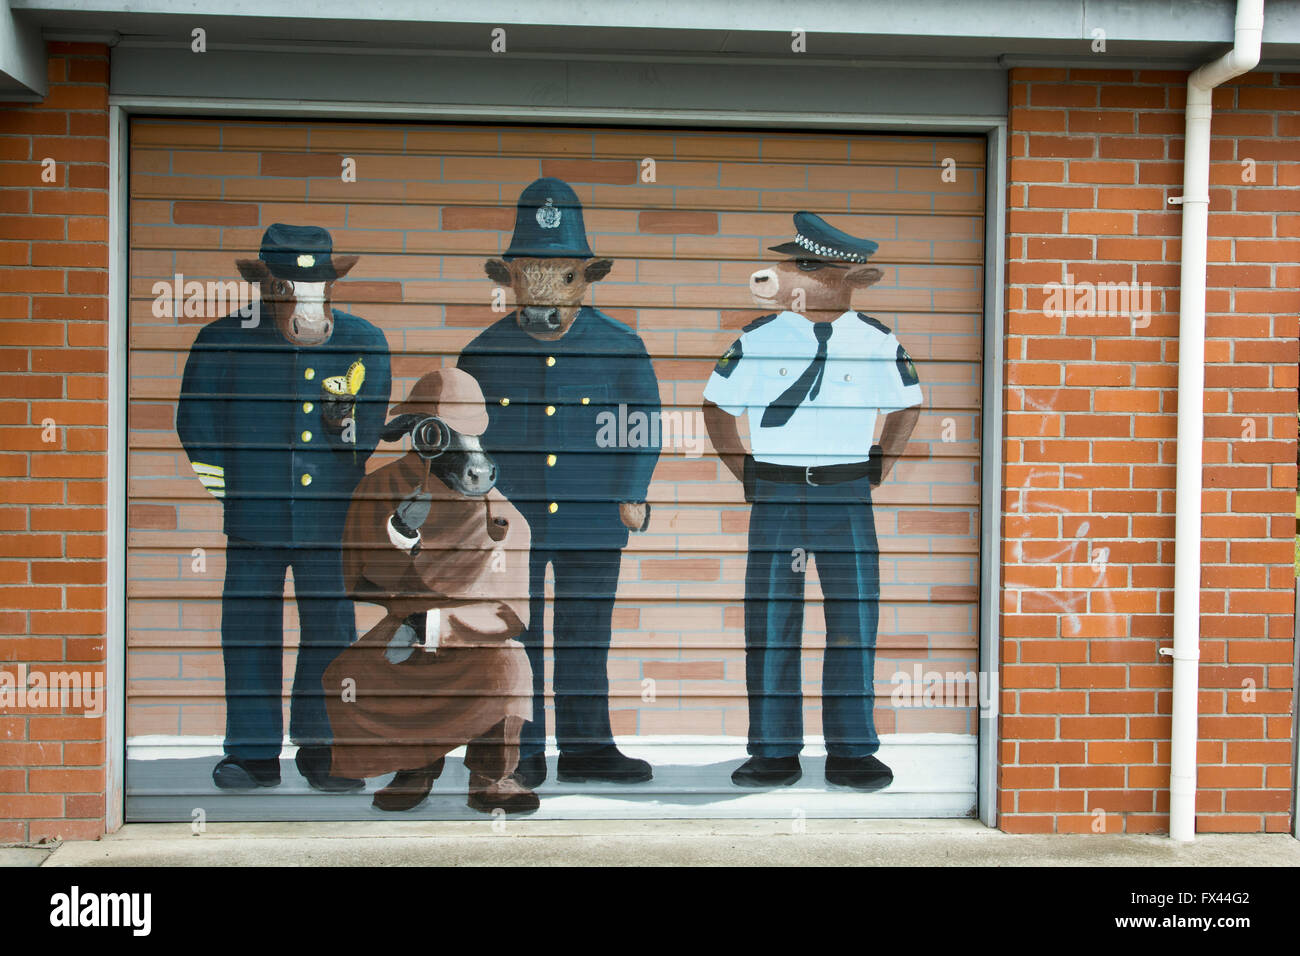 Bulls is a small town with a joking police in southern part of New Zealand's North Island named after its founder James Bull. Stock Photo